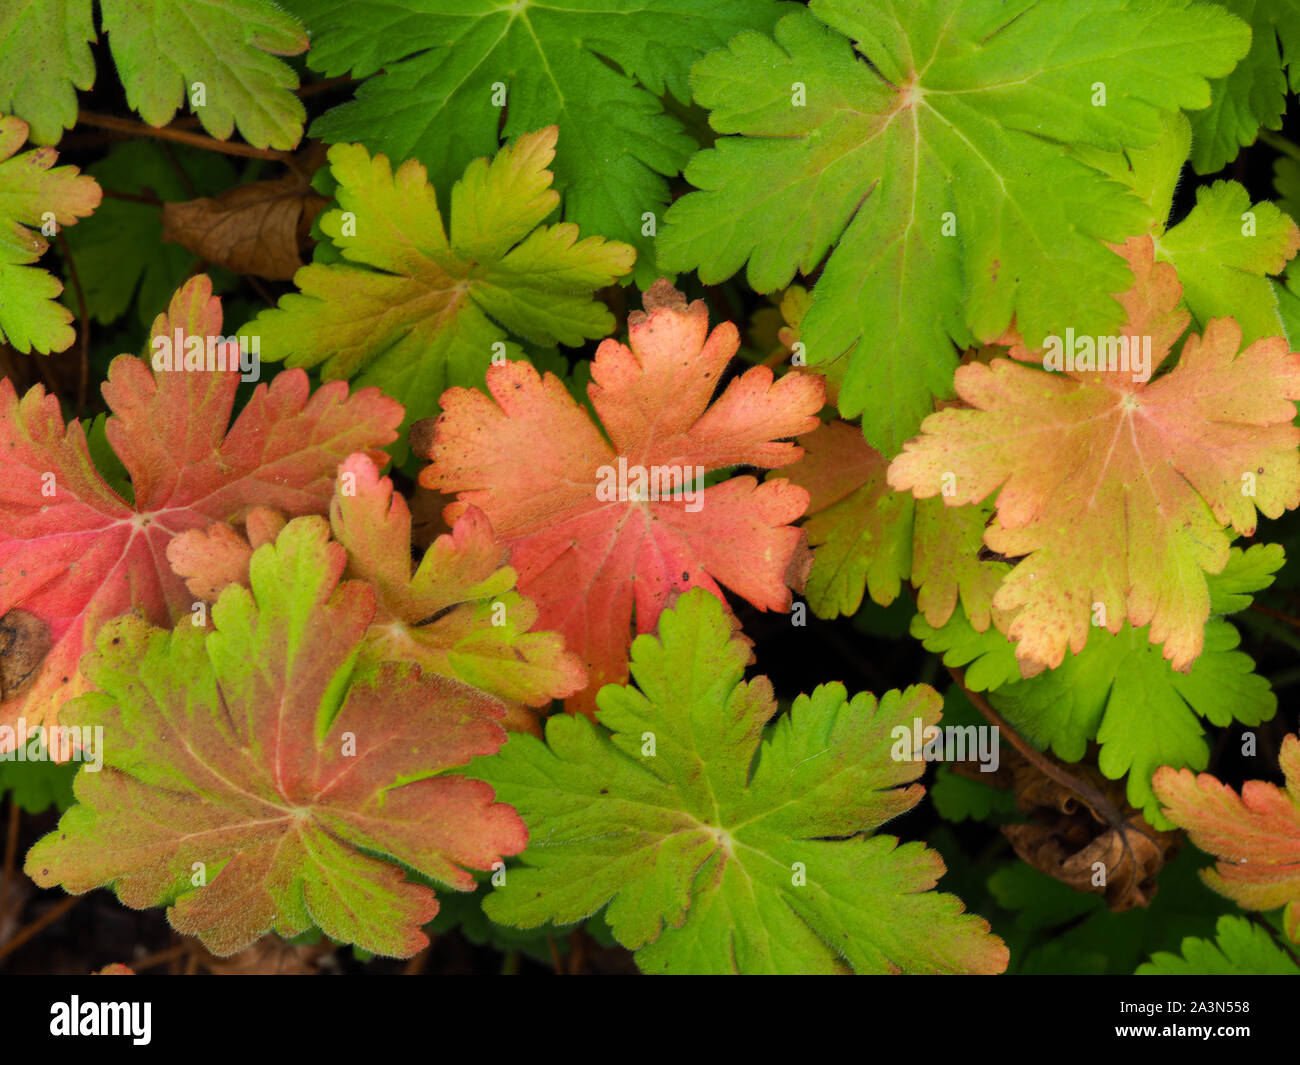 Geranium plant with green and red leaves in autumn in a garden in Yorkshire, England Stock Photo